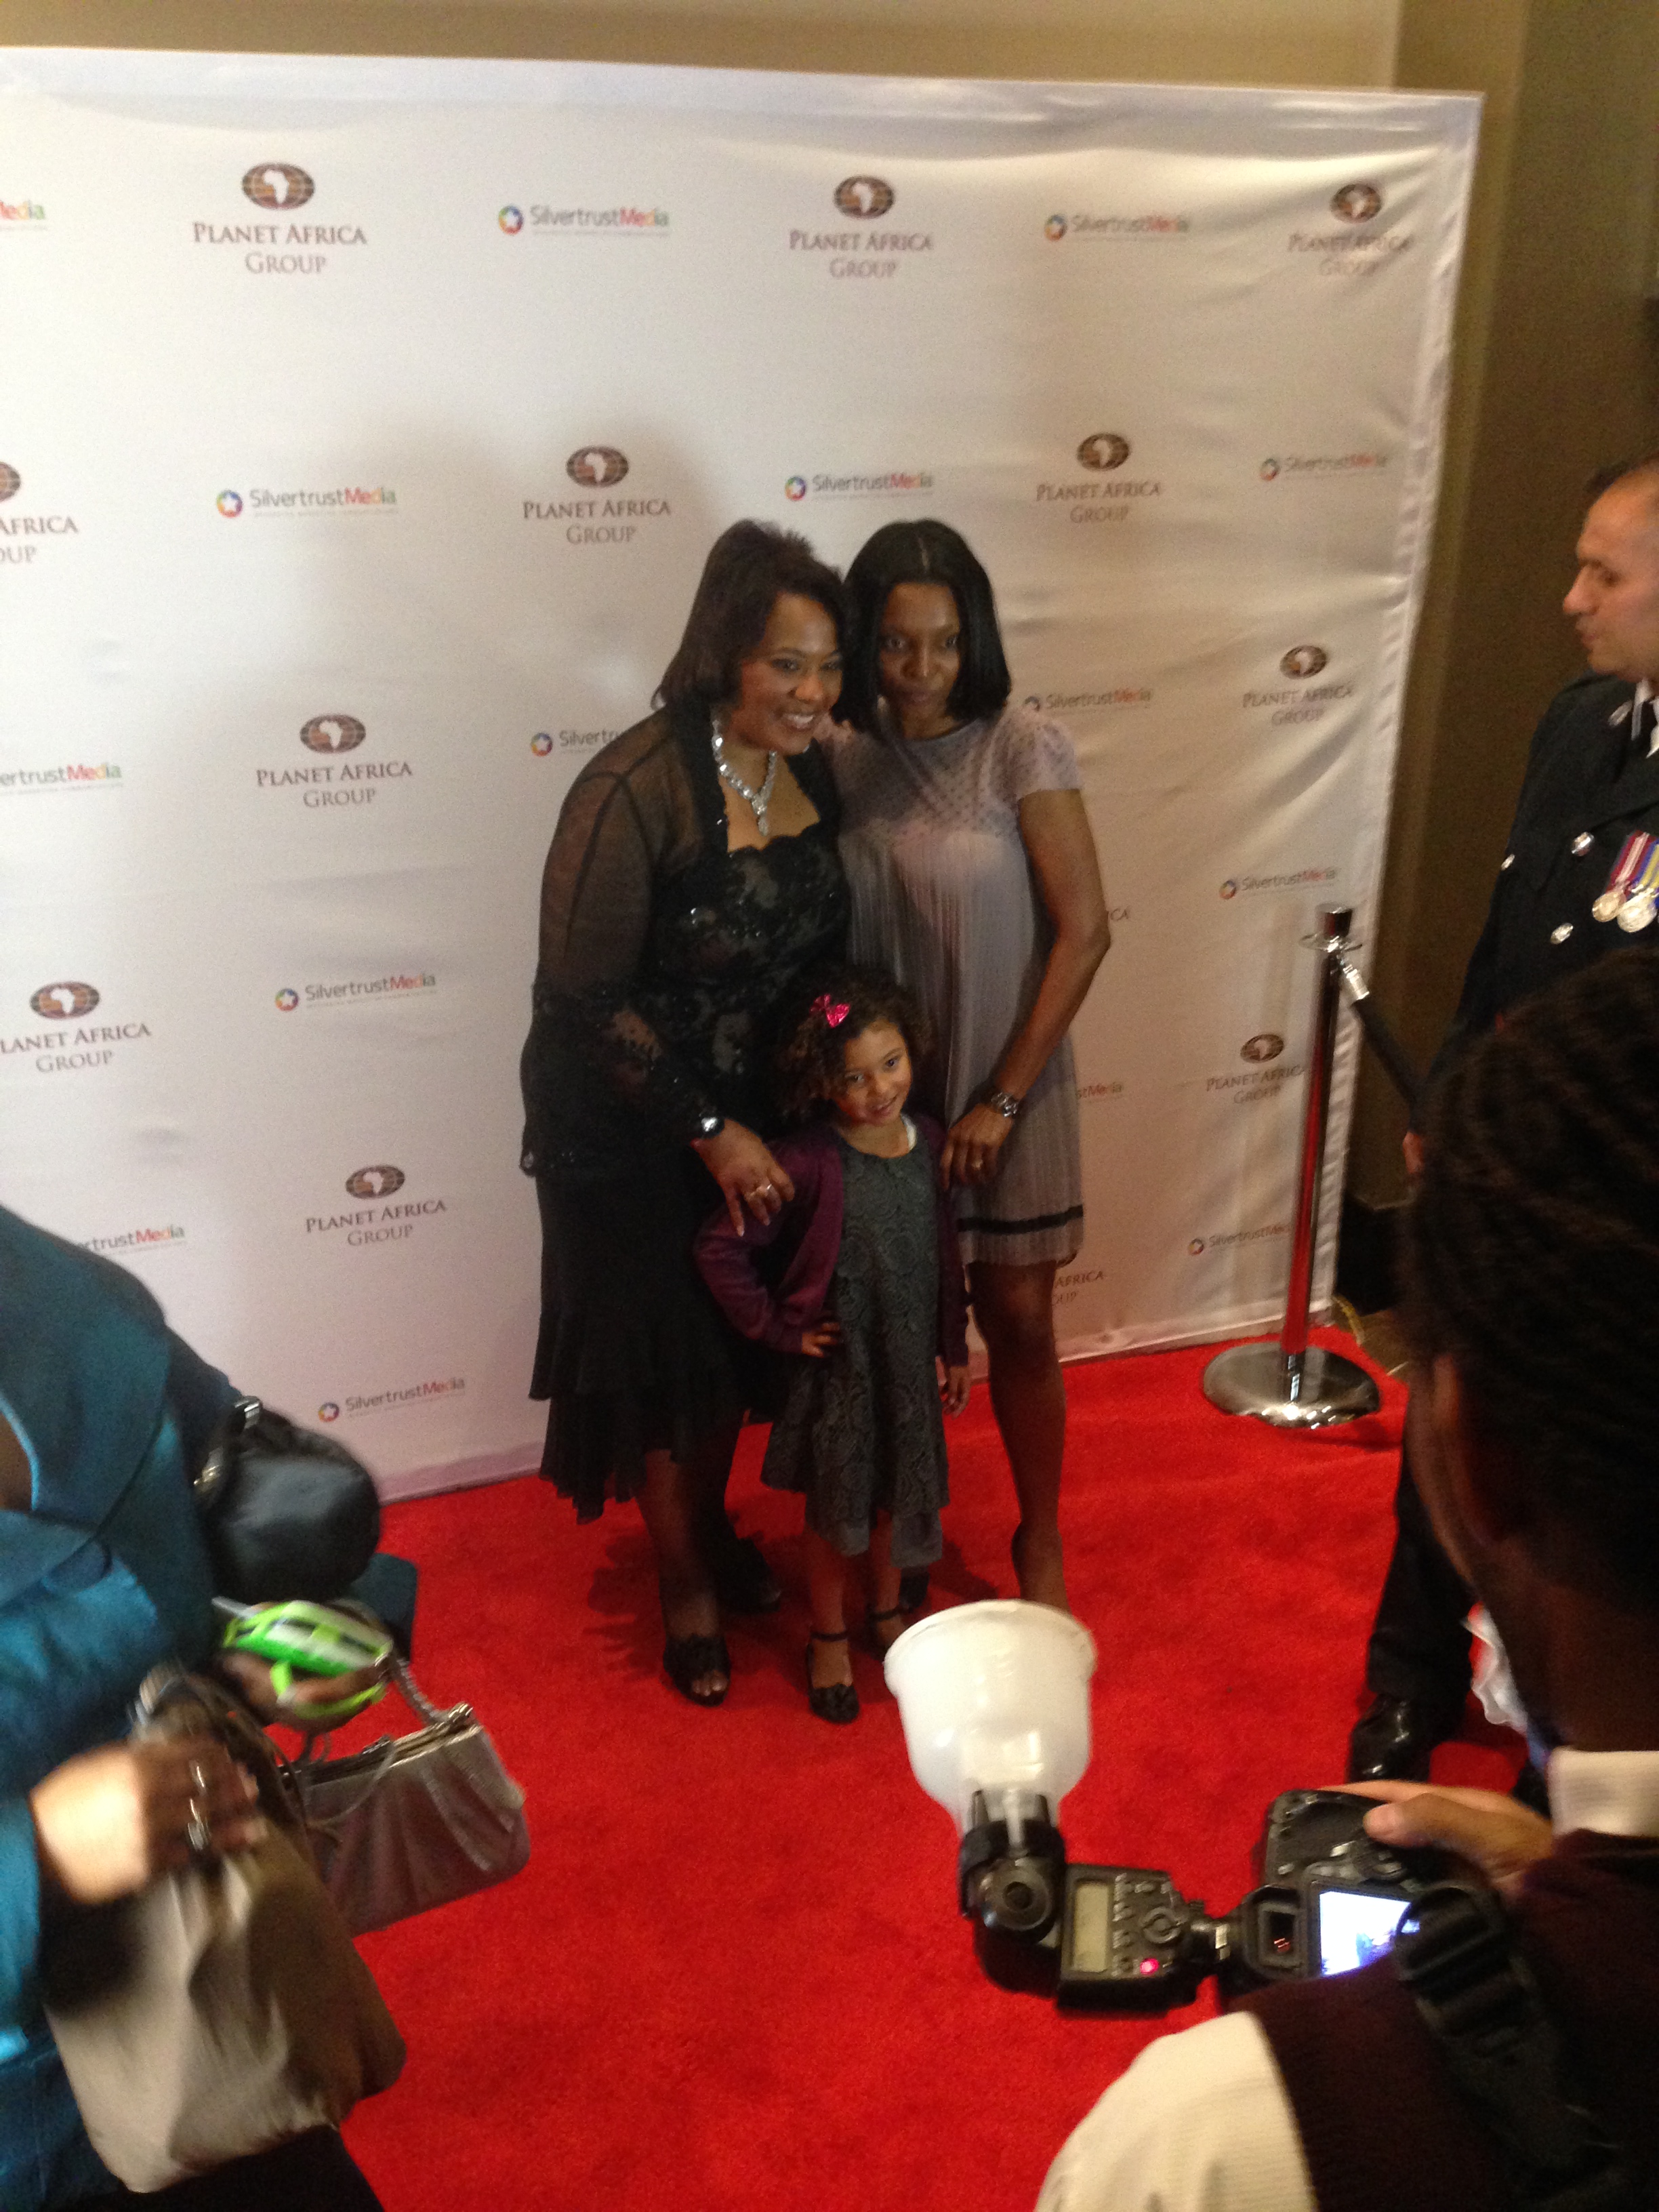 Aaliyah Cinello on the red carpet with her mom Raven Cinello and Dr. Bernice King.